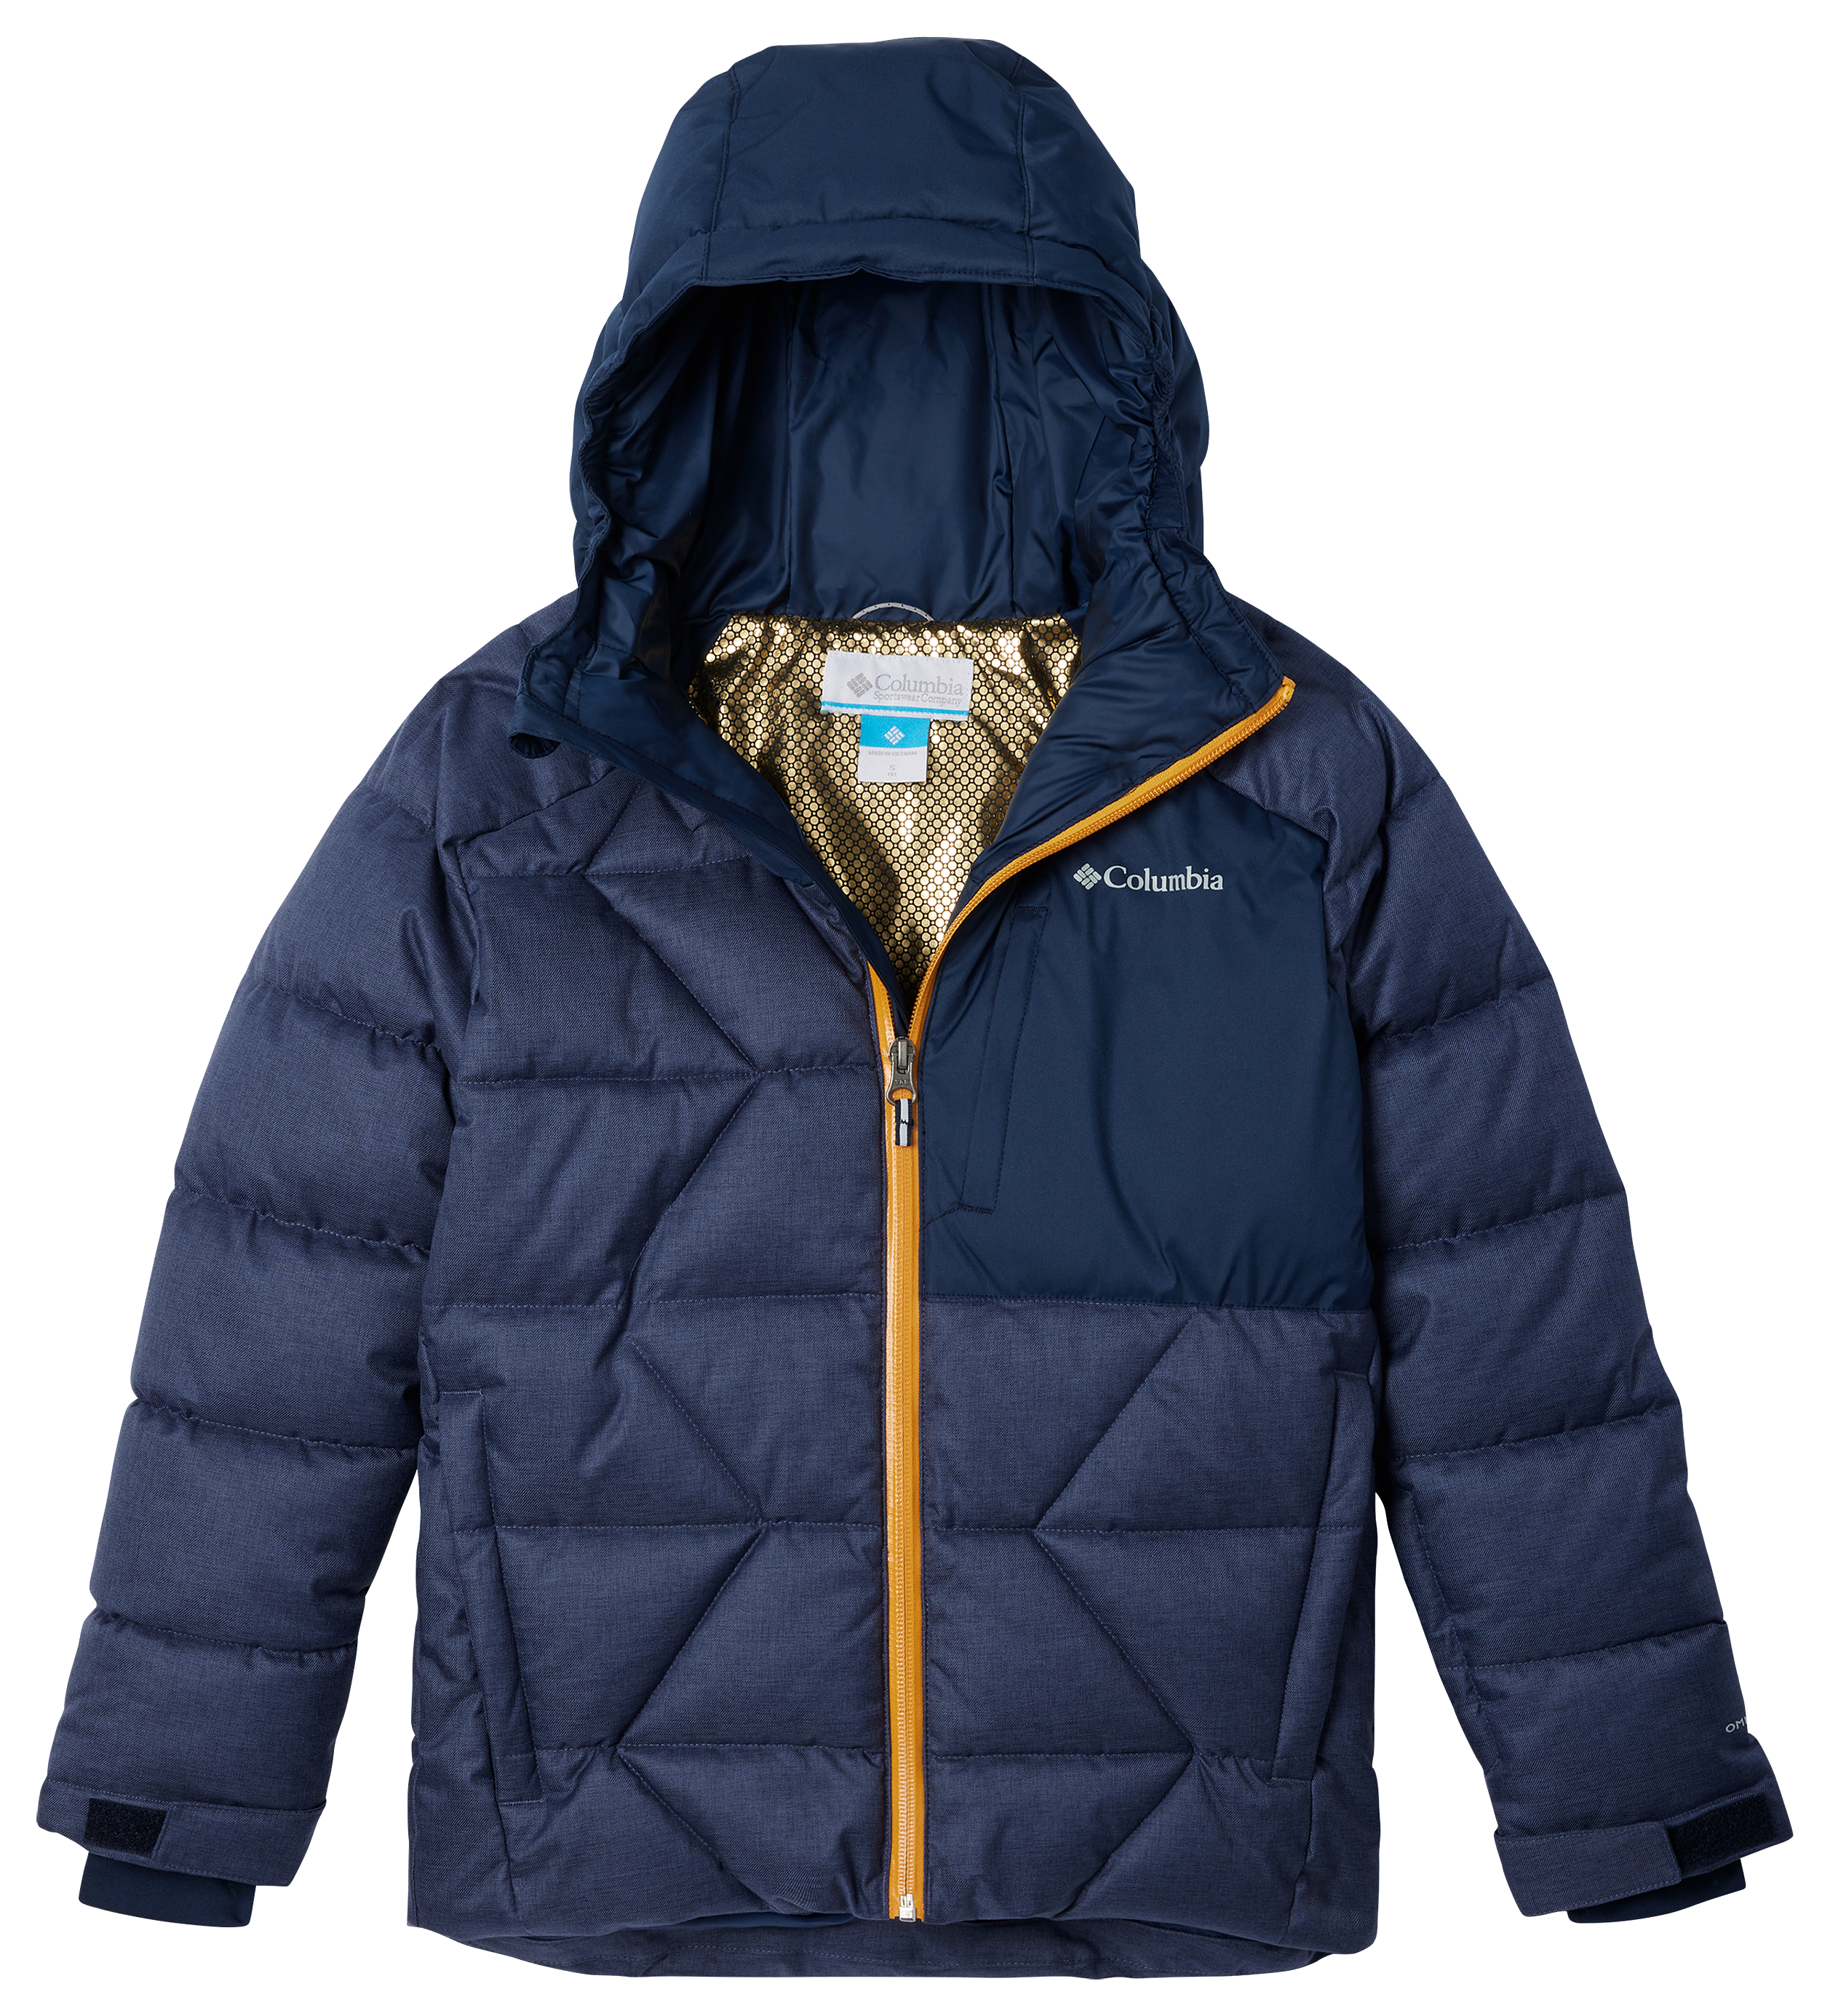 Columbia Winter Powder II Quilted Jacket with Zip Chest Pocket for